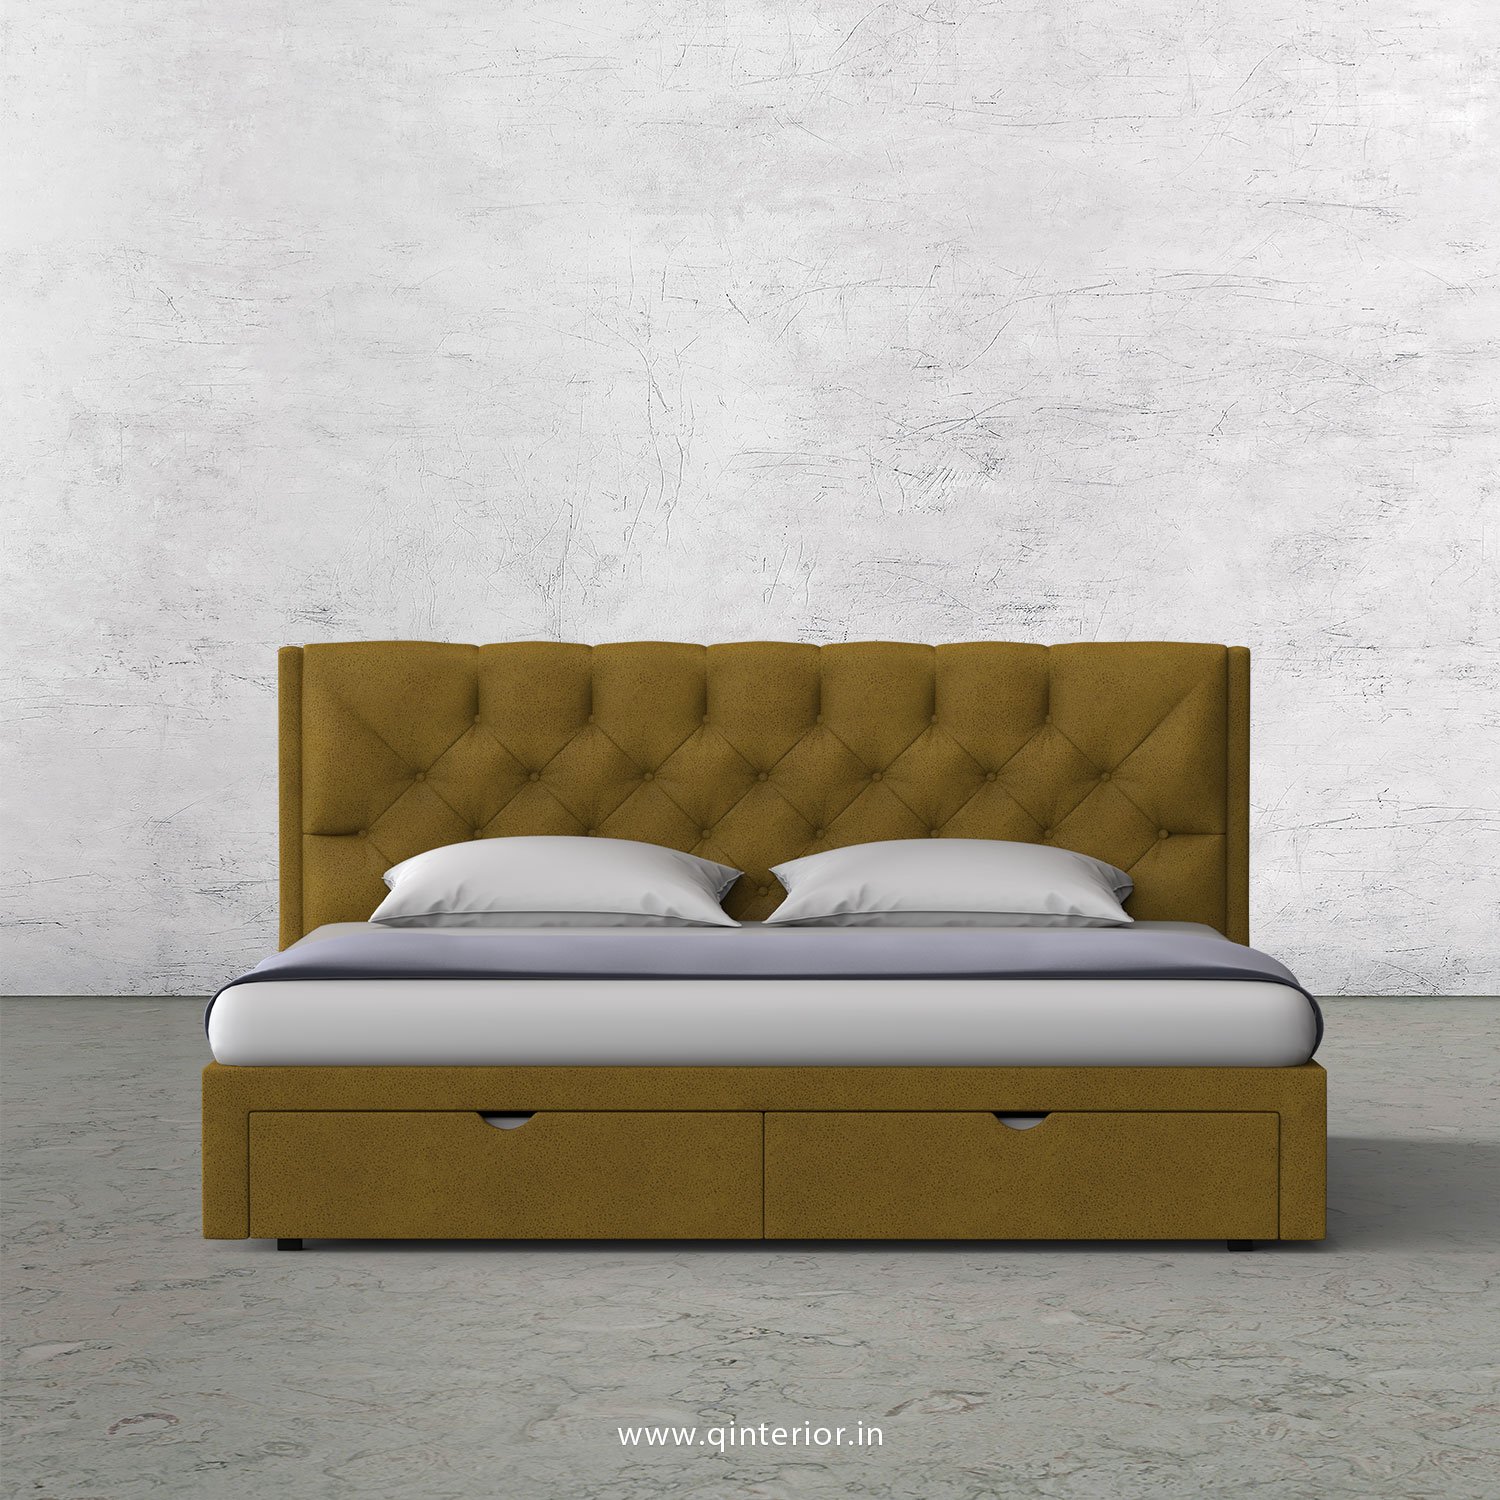 Scorpius King Size Storage Bed in Fab Leather Fabric - KBD001 FL18